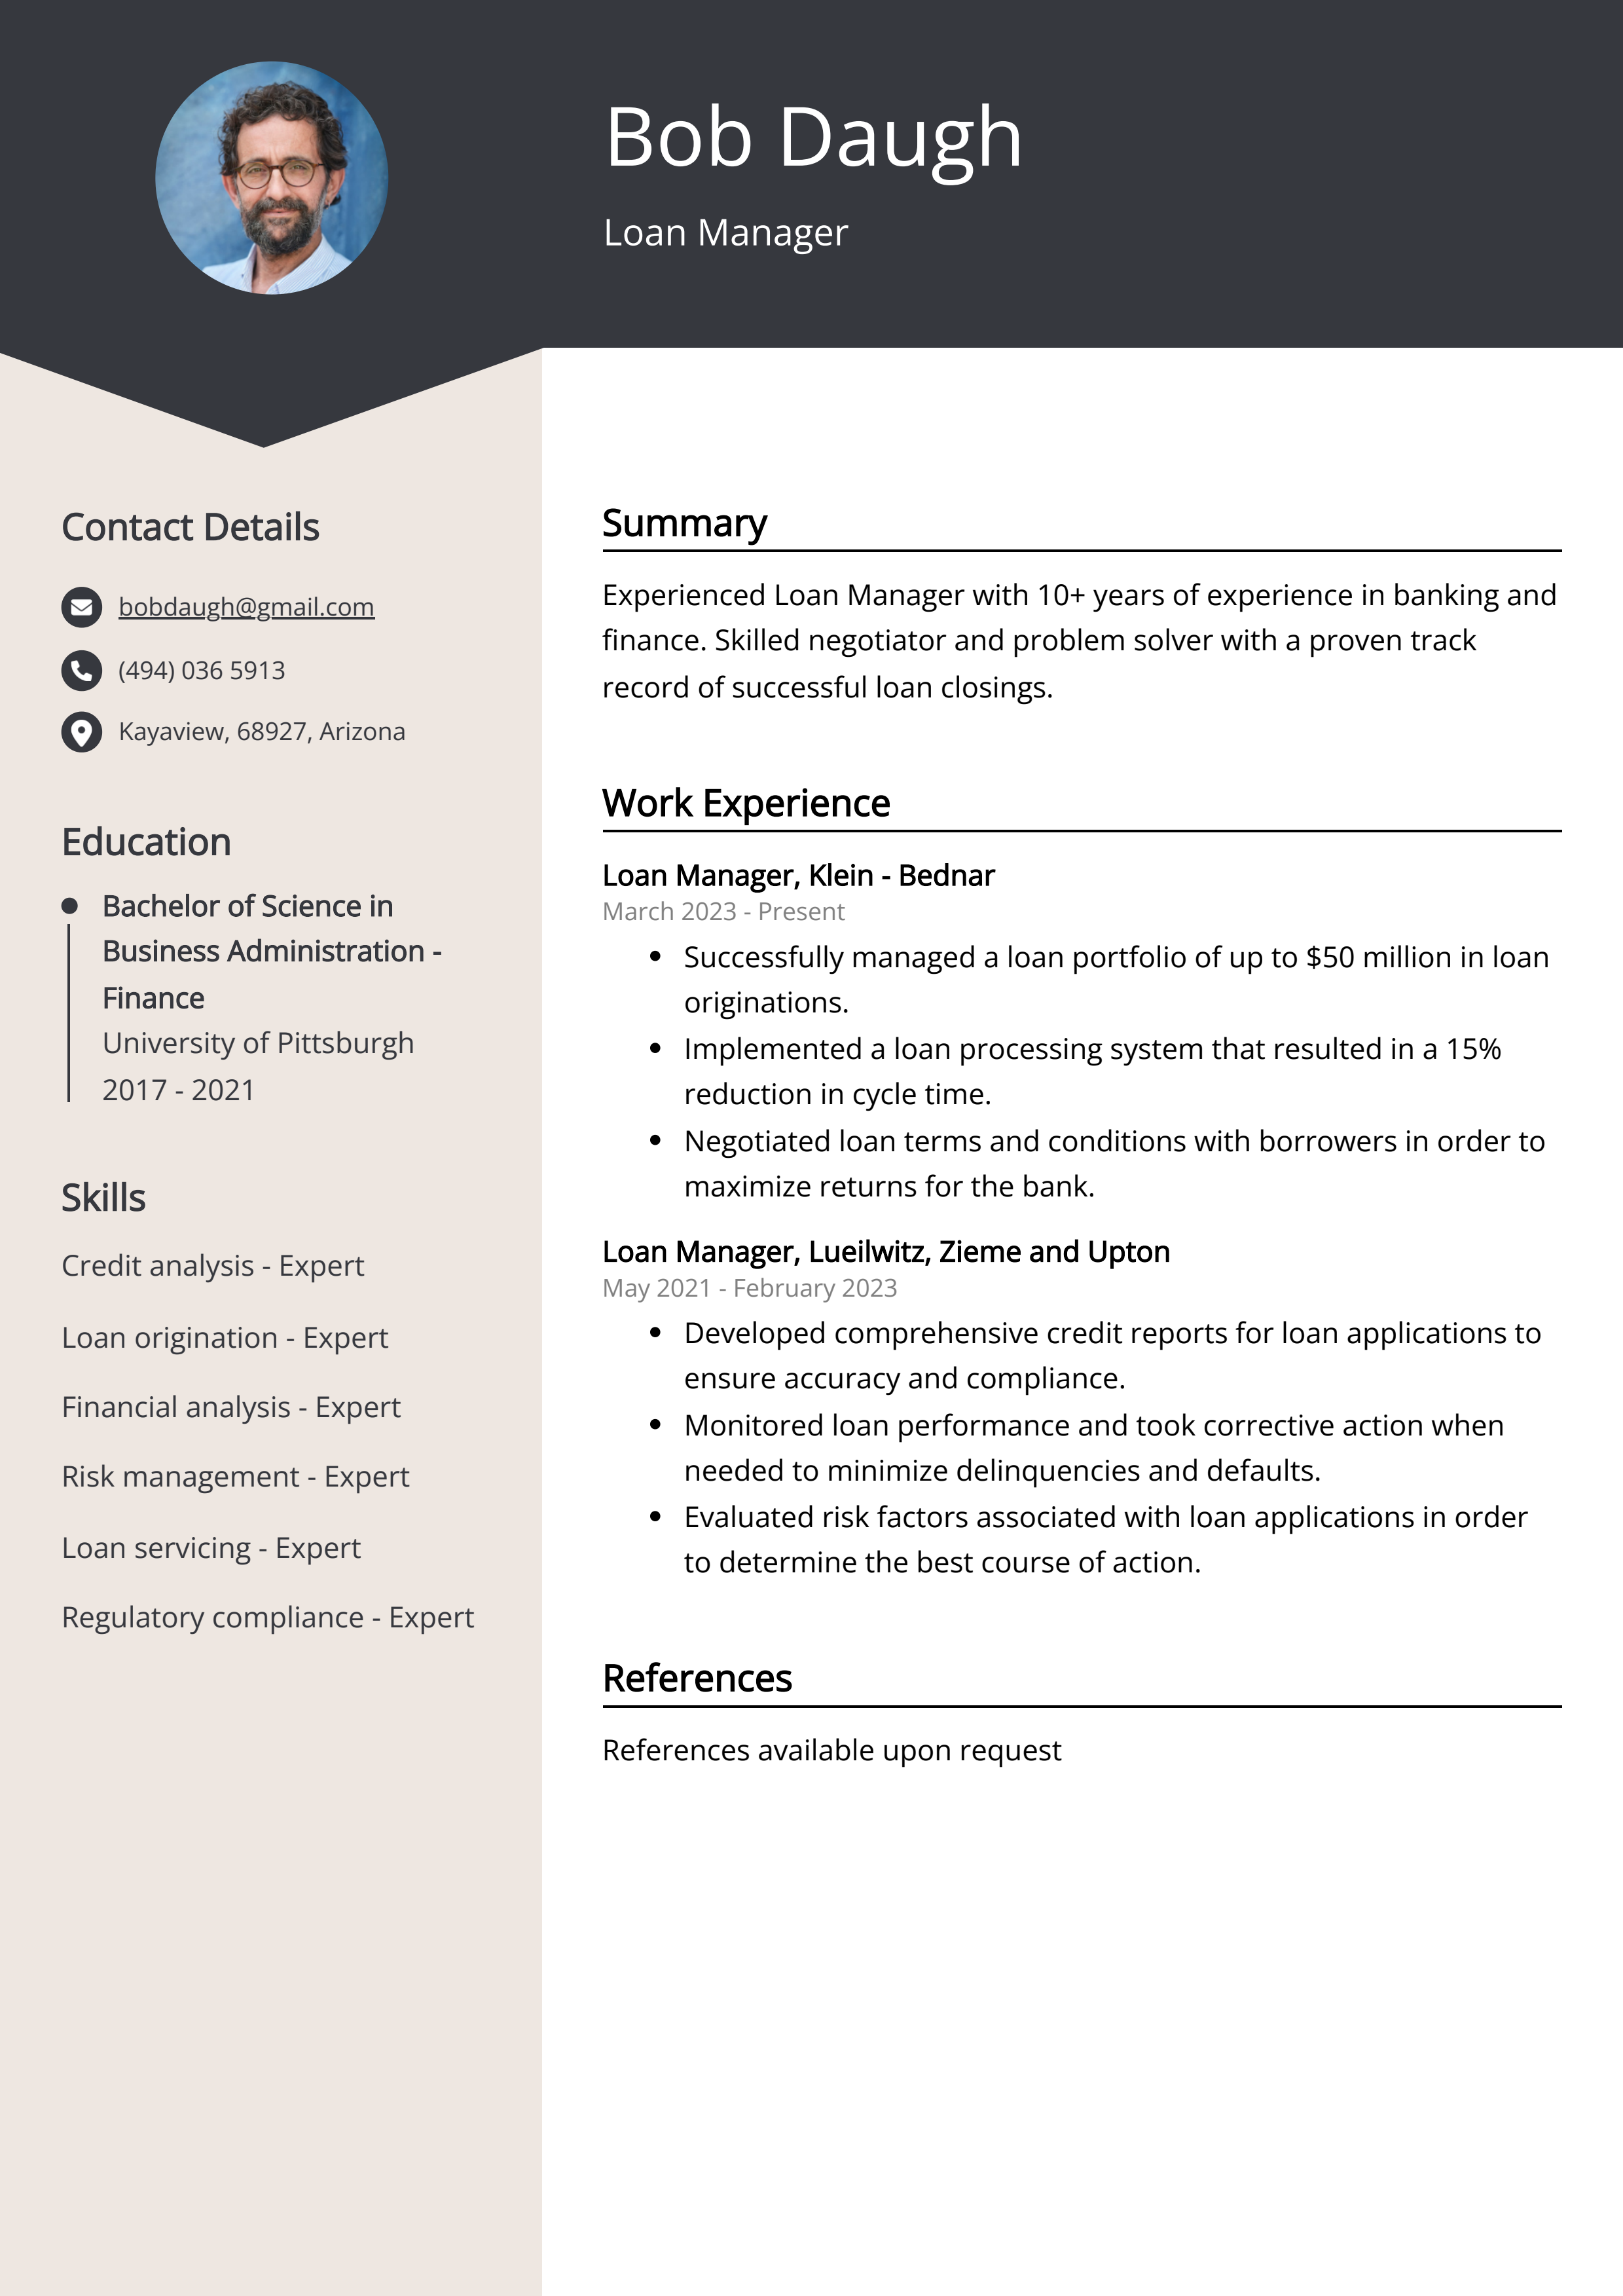 Loan Manager CV Example